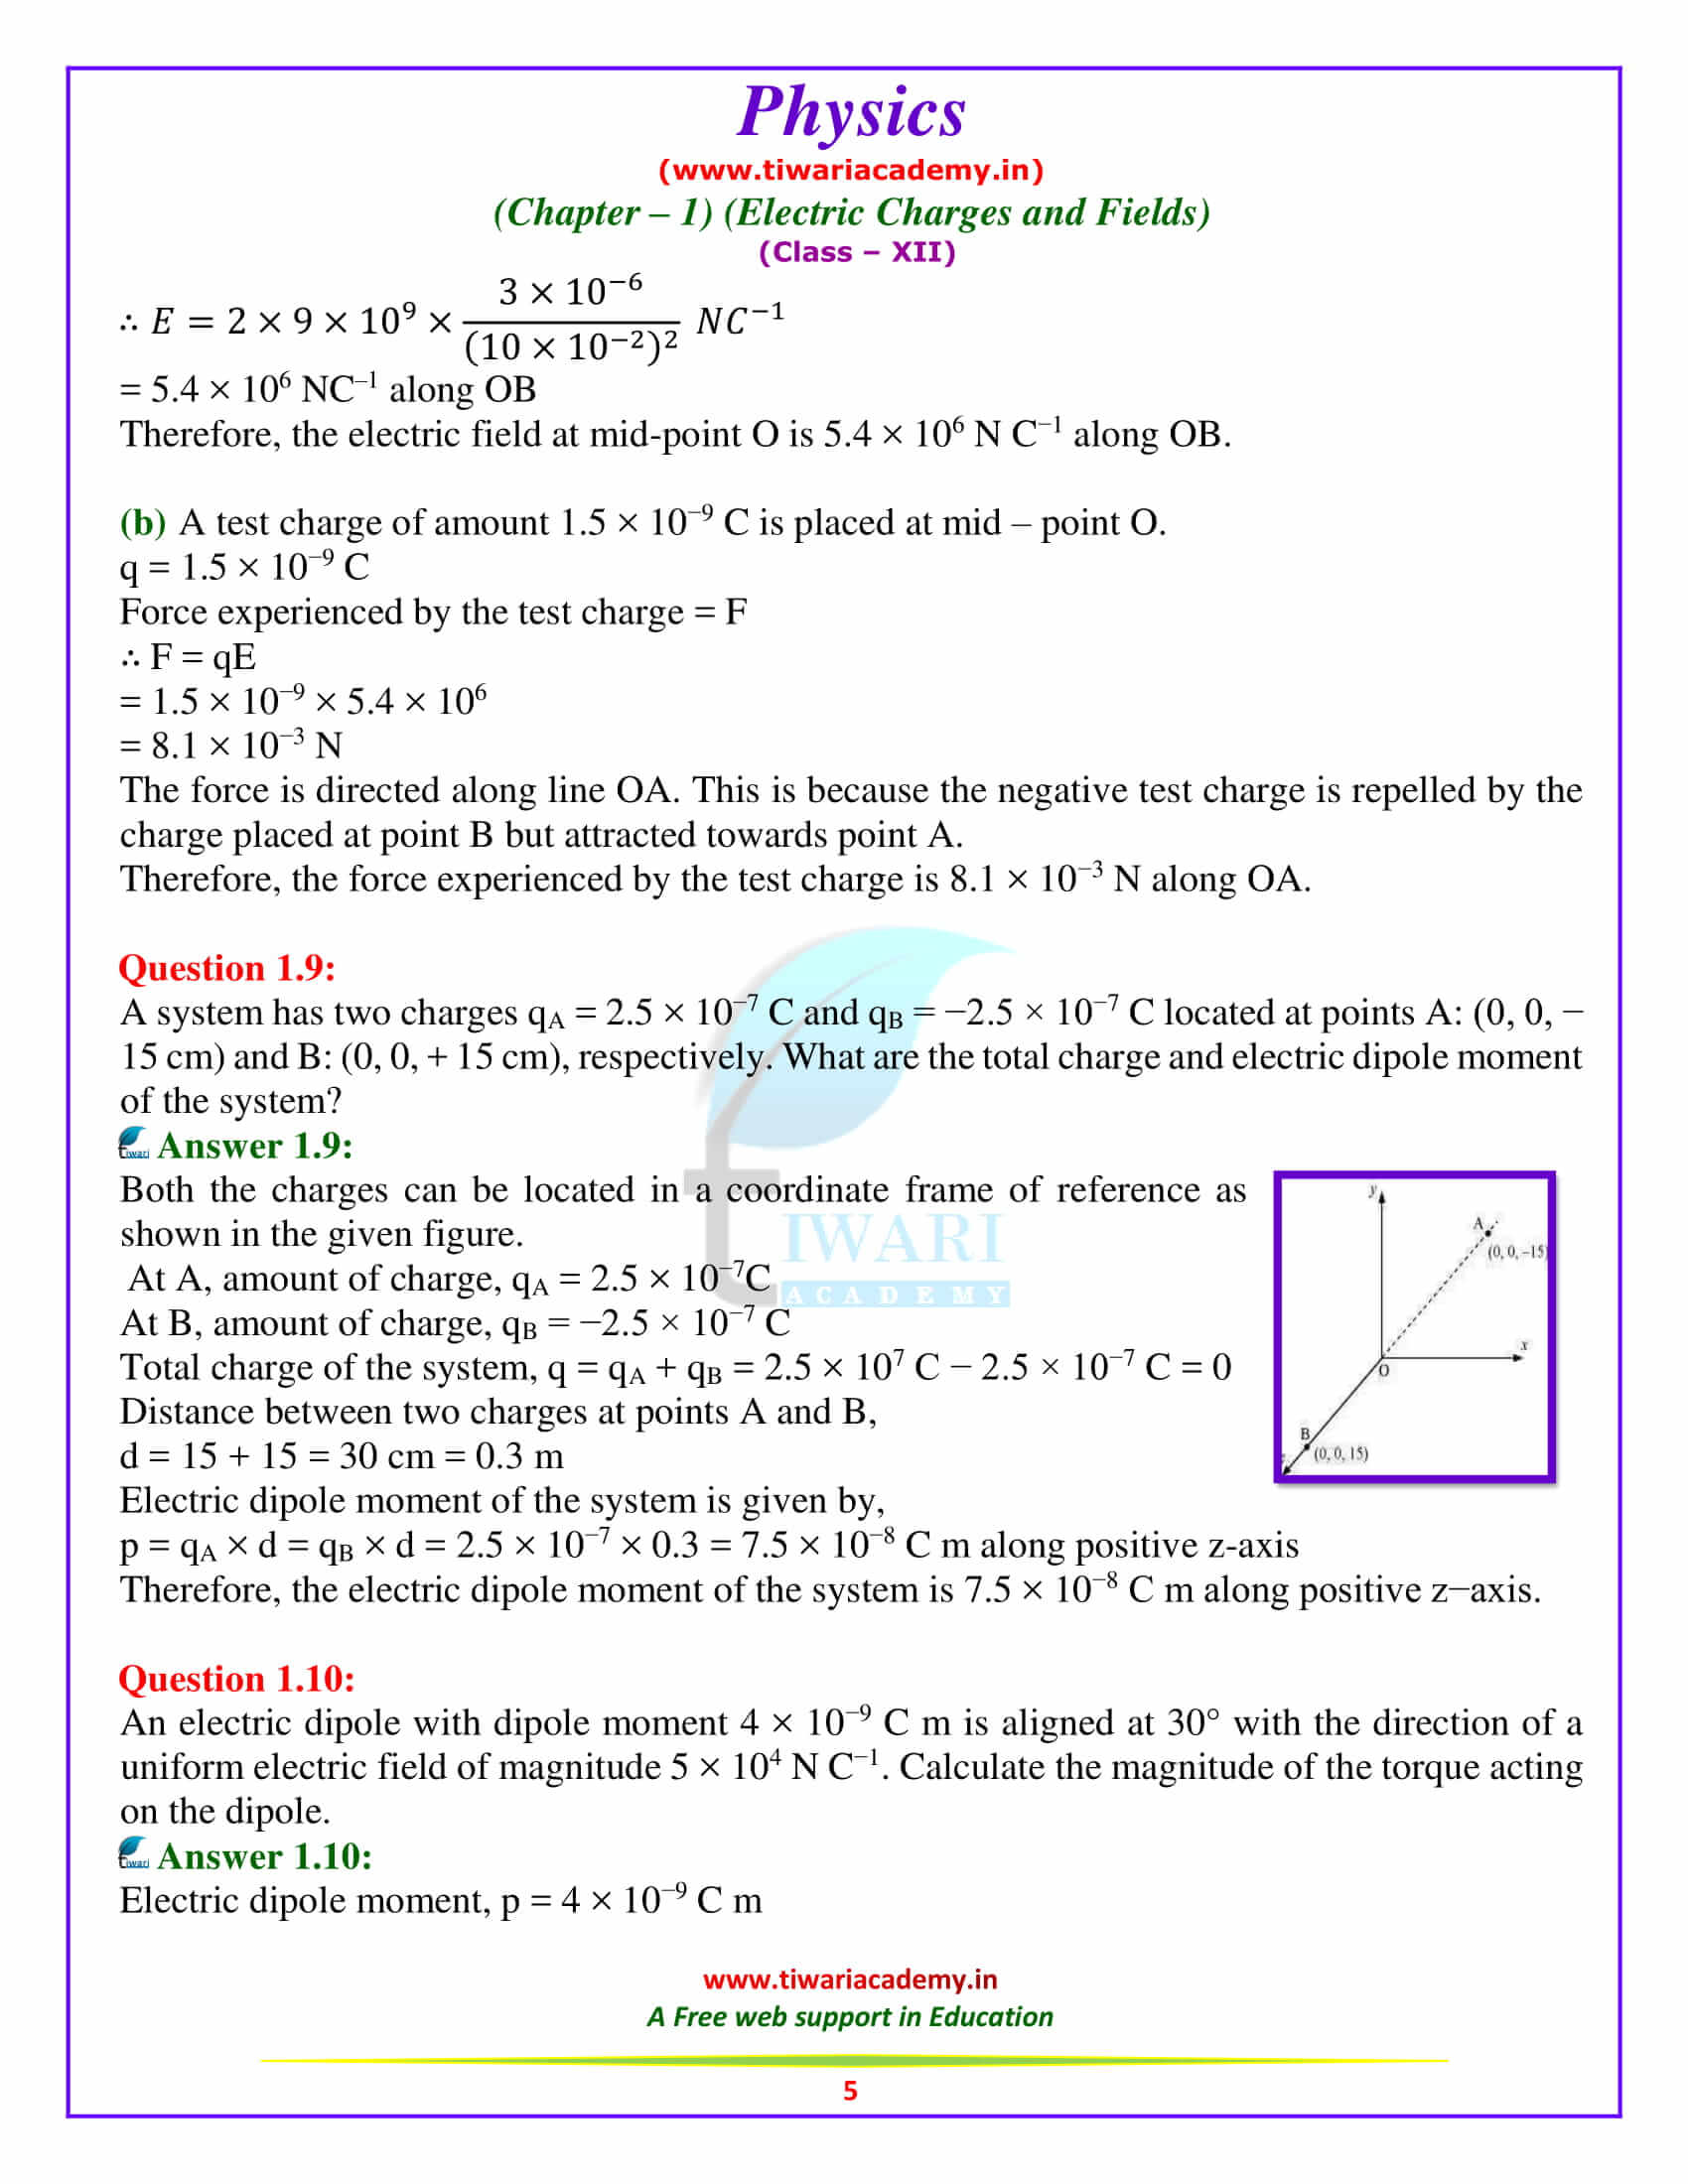 NCERT Solutions for Class 12 Physics Chapter 1 all questions answers